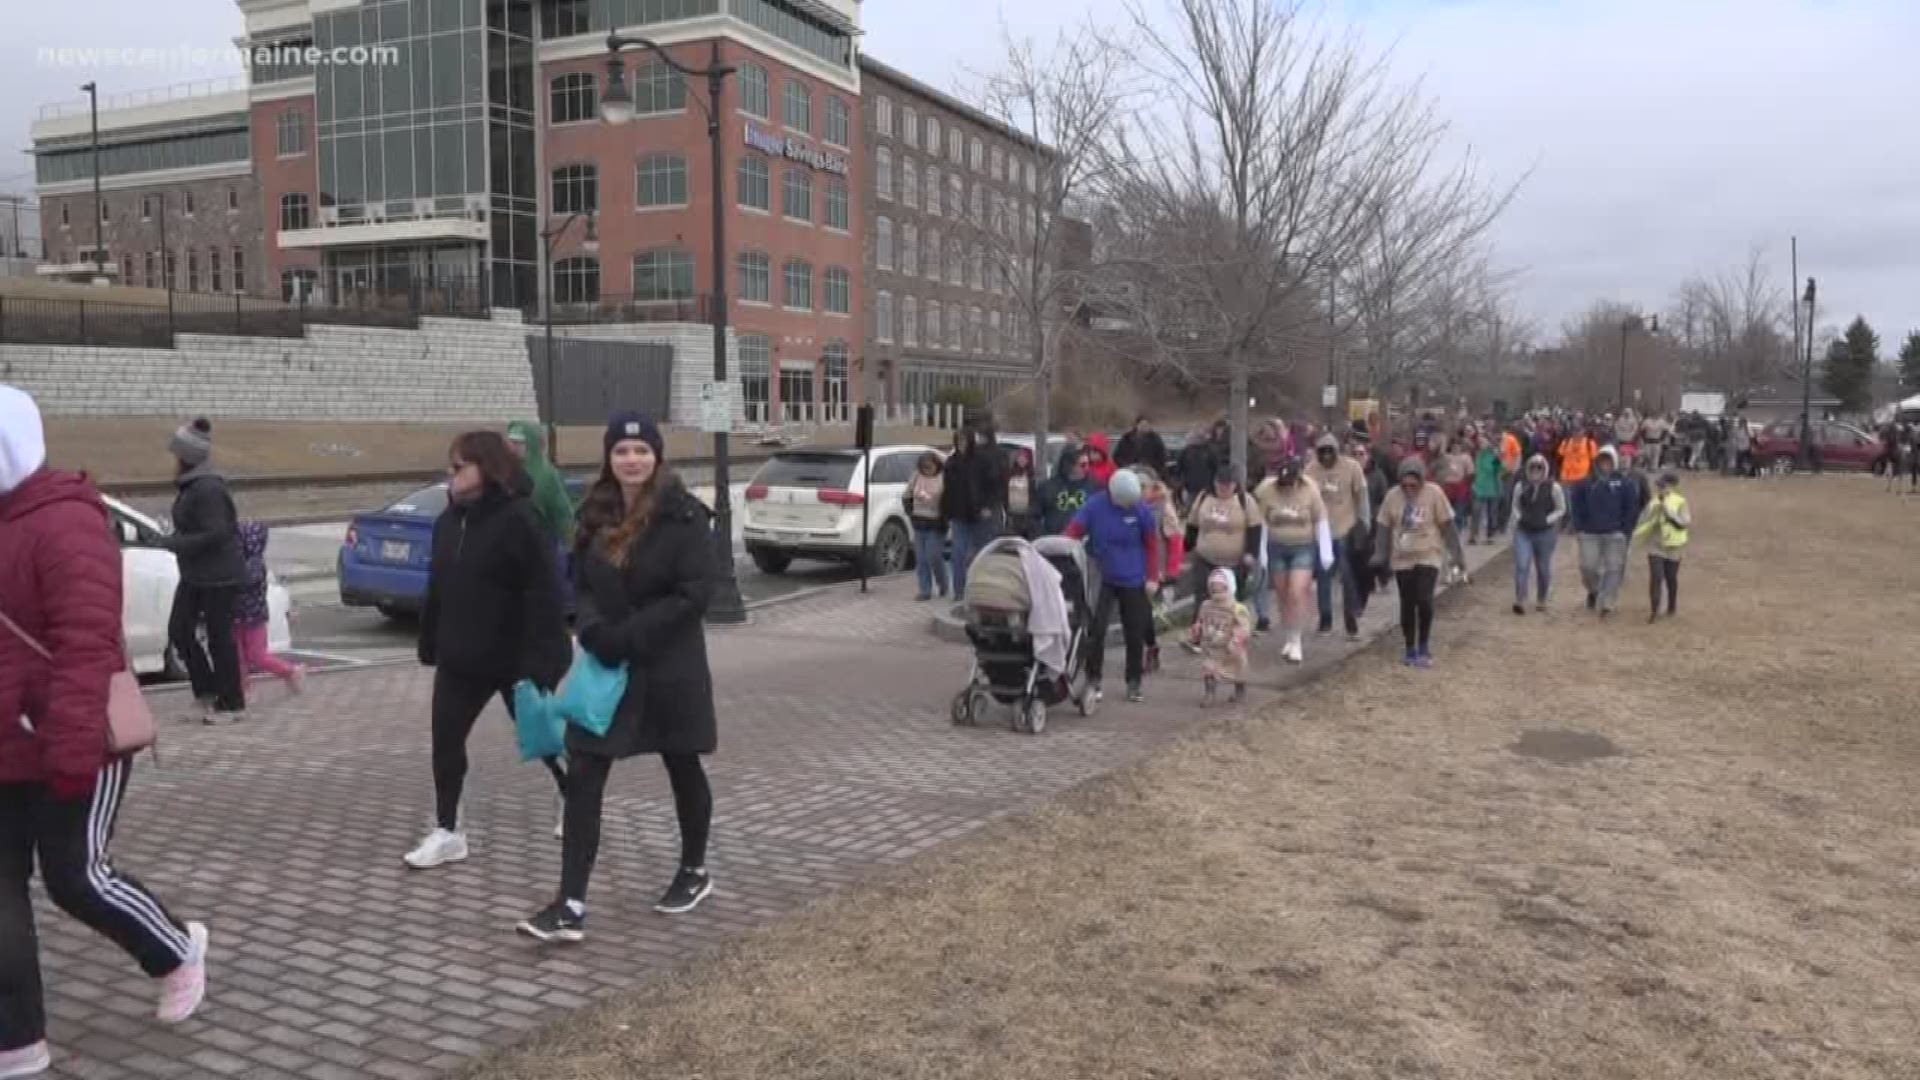 Mainers took to the streets in Bangor Saturday for the annual Hike for the Homeless event.